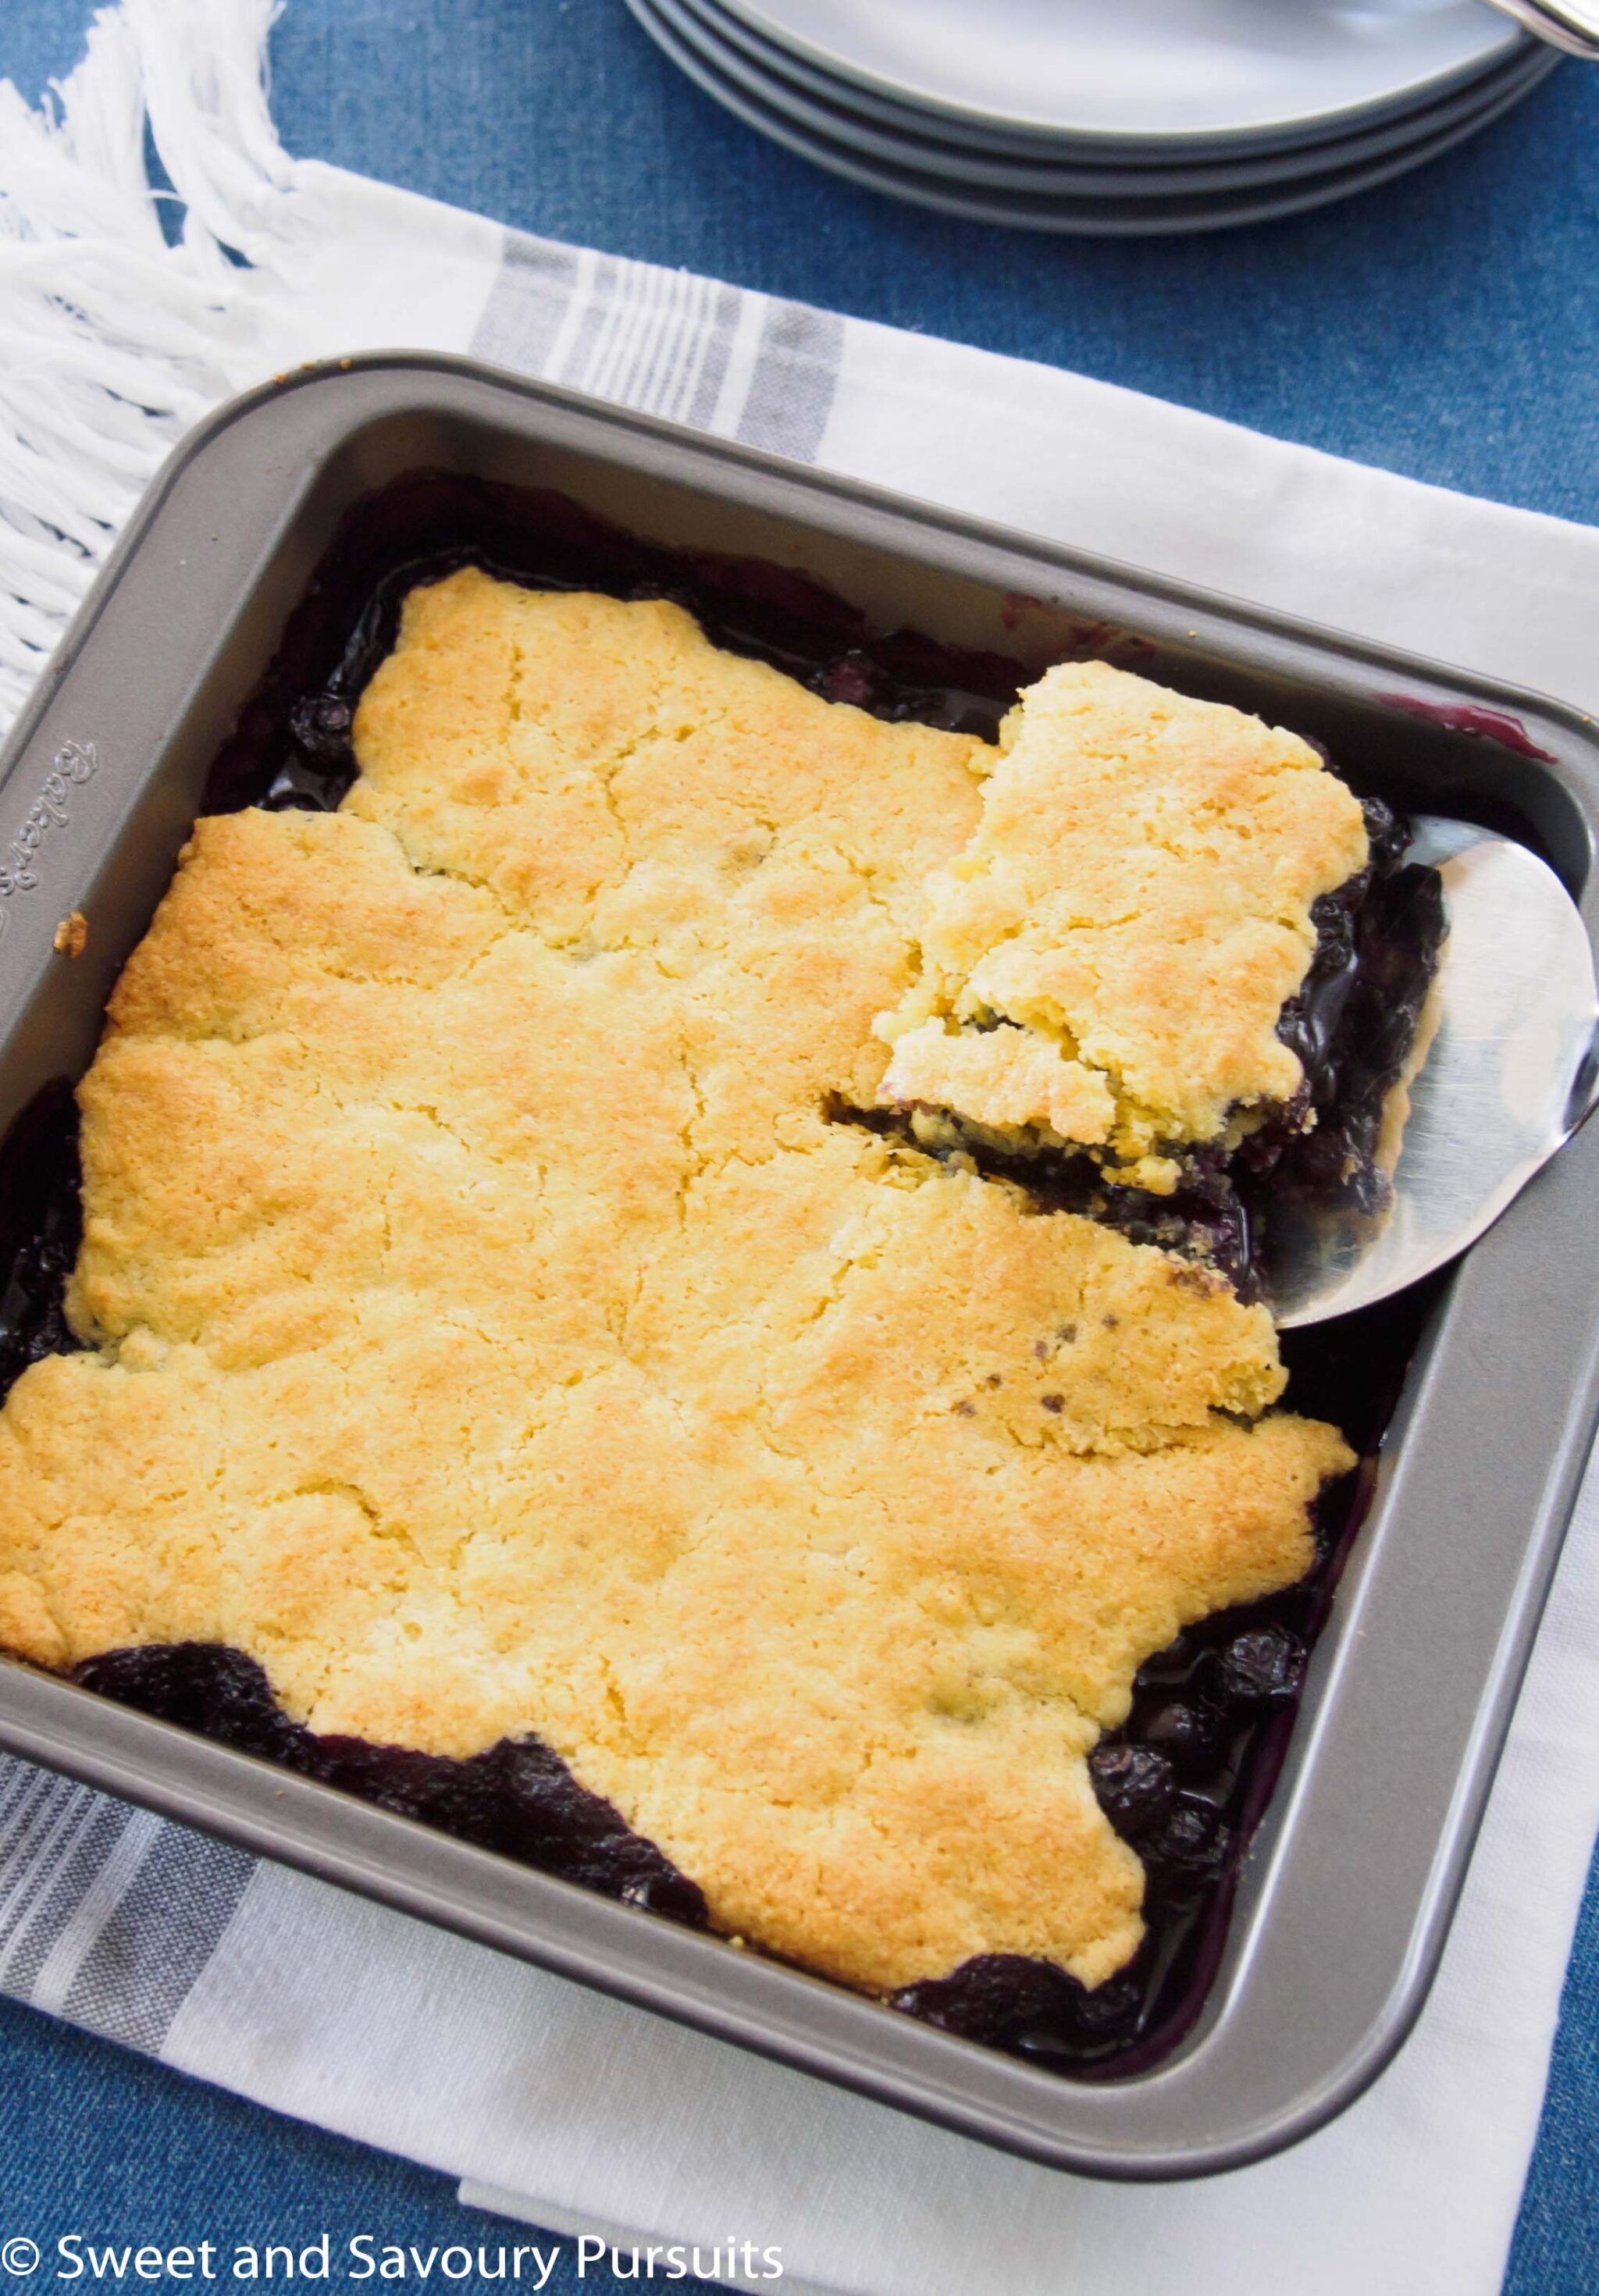 Top view of a baked blueberry cobbler.